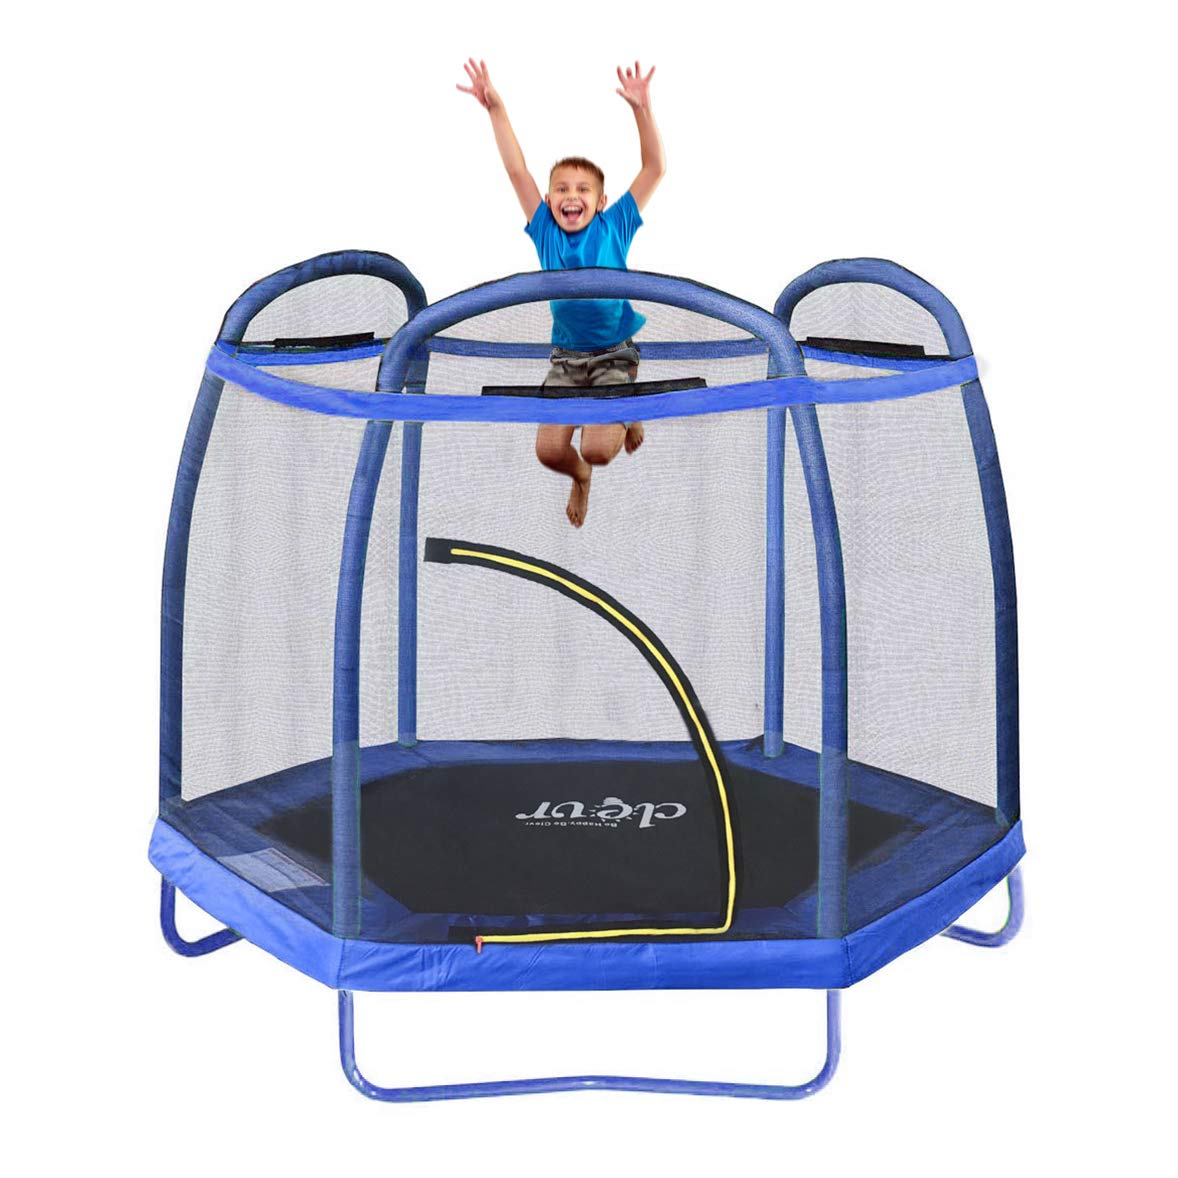 Clevr 7ft Kids Trampoline with Safety Enclosure Net & Spring Pad, Mini Indoor/Outdoor Round Bounce Jumper 84", Built-in Zipper H